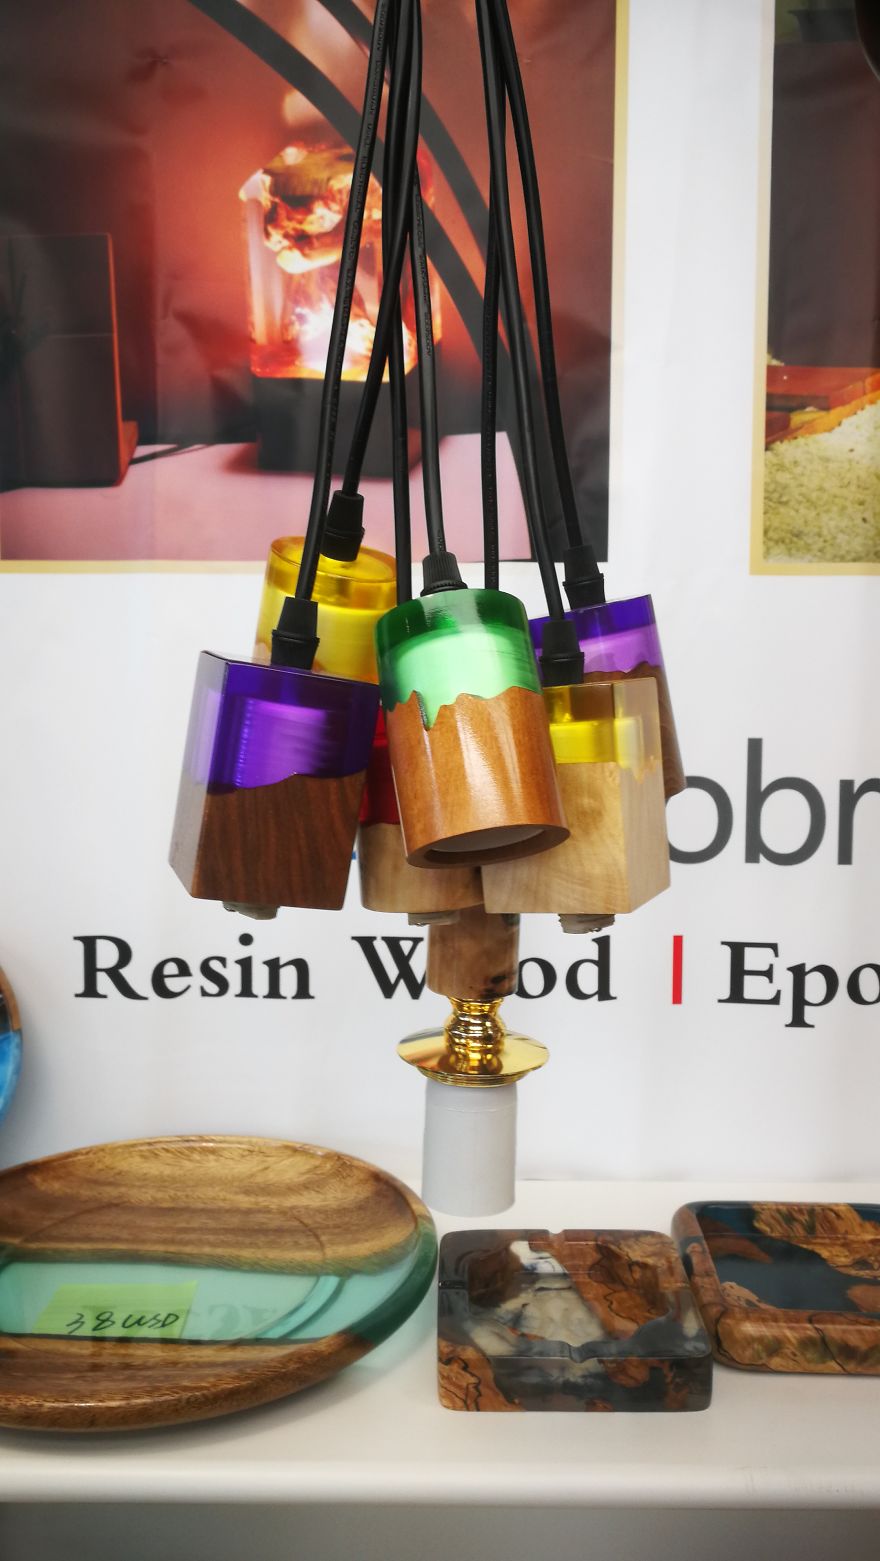 We Made Those Bulb Bases/ Lamp Holders With Natural Solid Wood And Ec0-Friendly Epoxy Resin